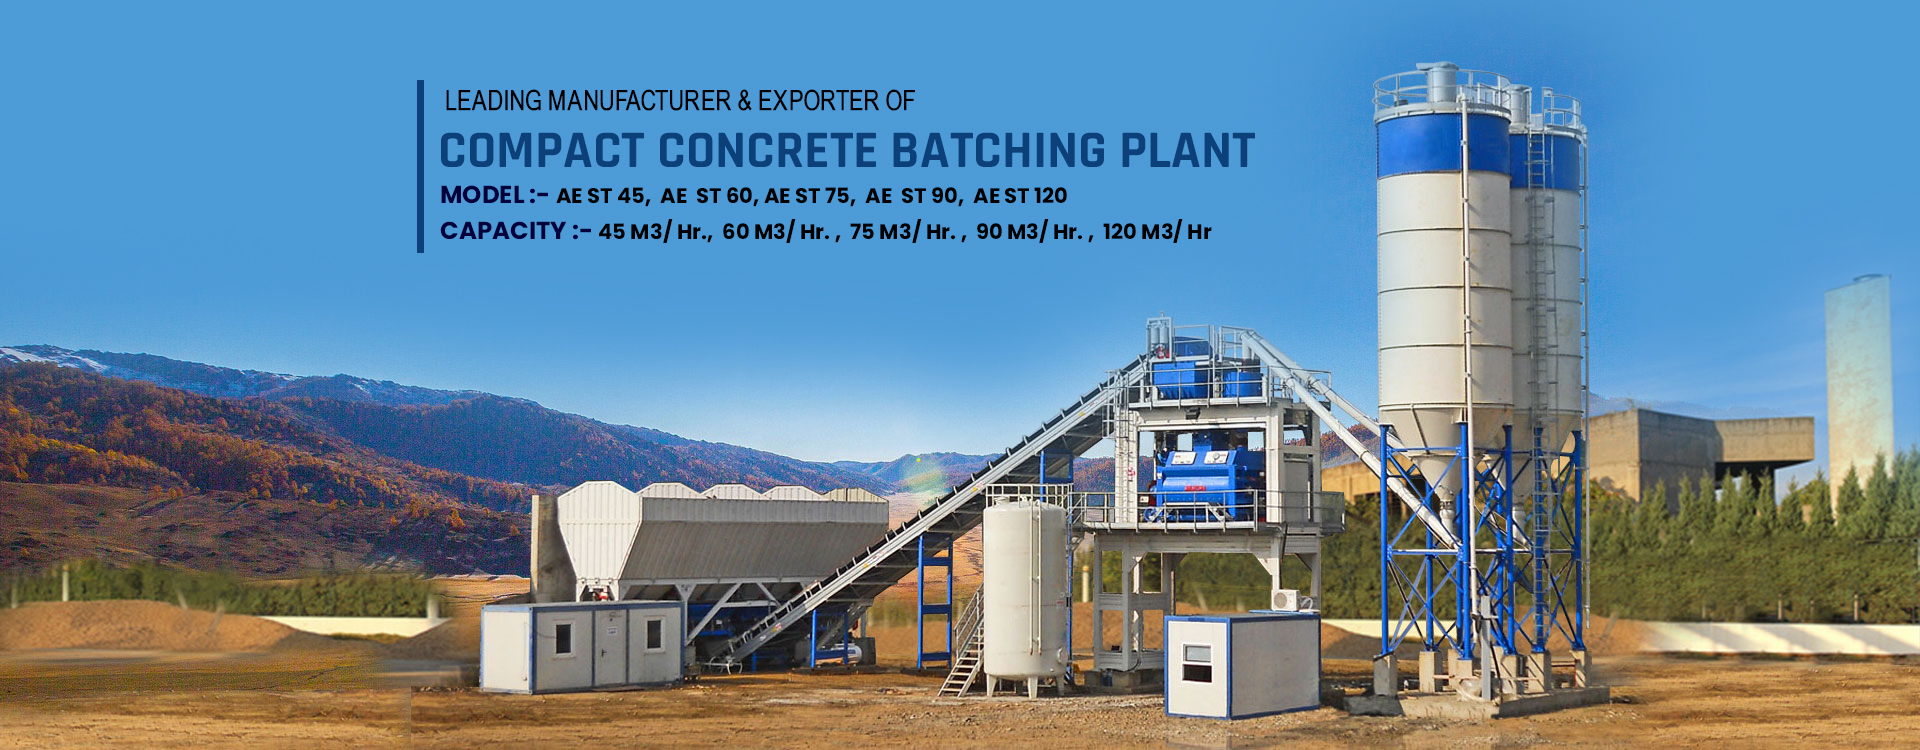 Compact Concrete Batching Plant Exporter & Manufacturer in Tunisa